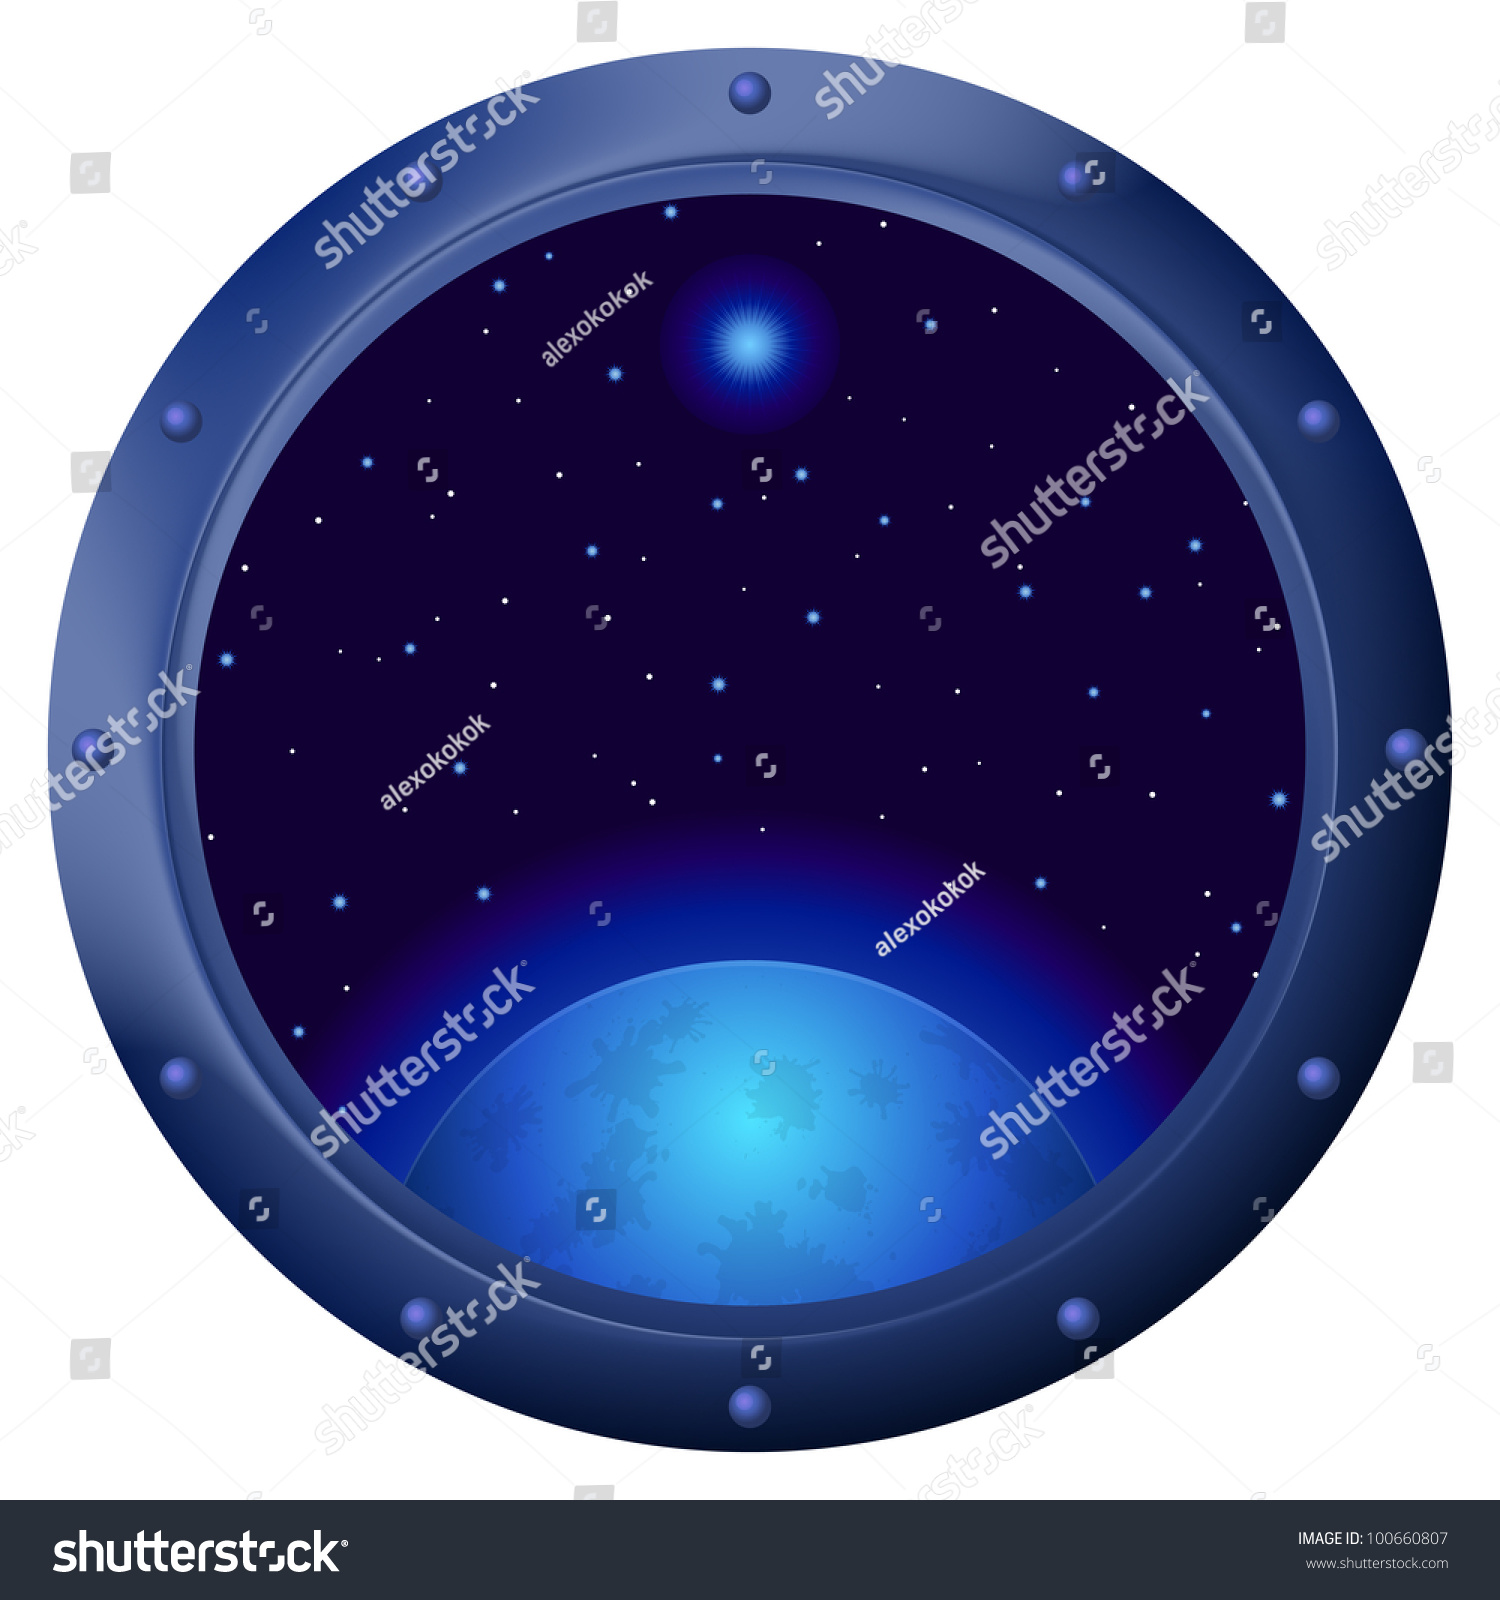 3,210 Outer space window Images, Stock Photos & Vectors | Shutterstock